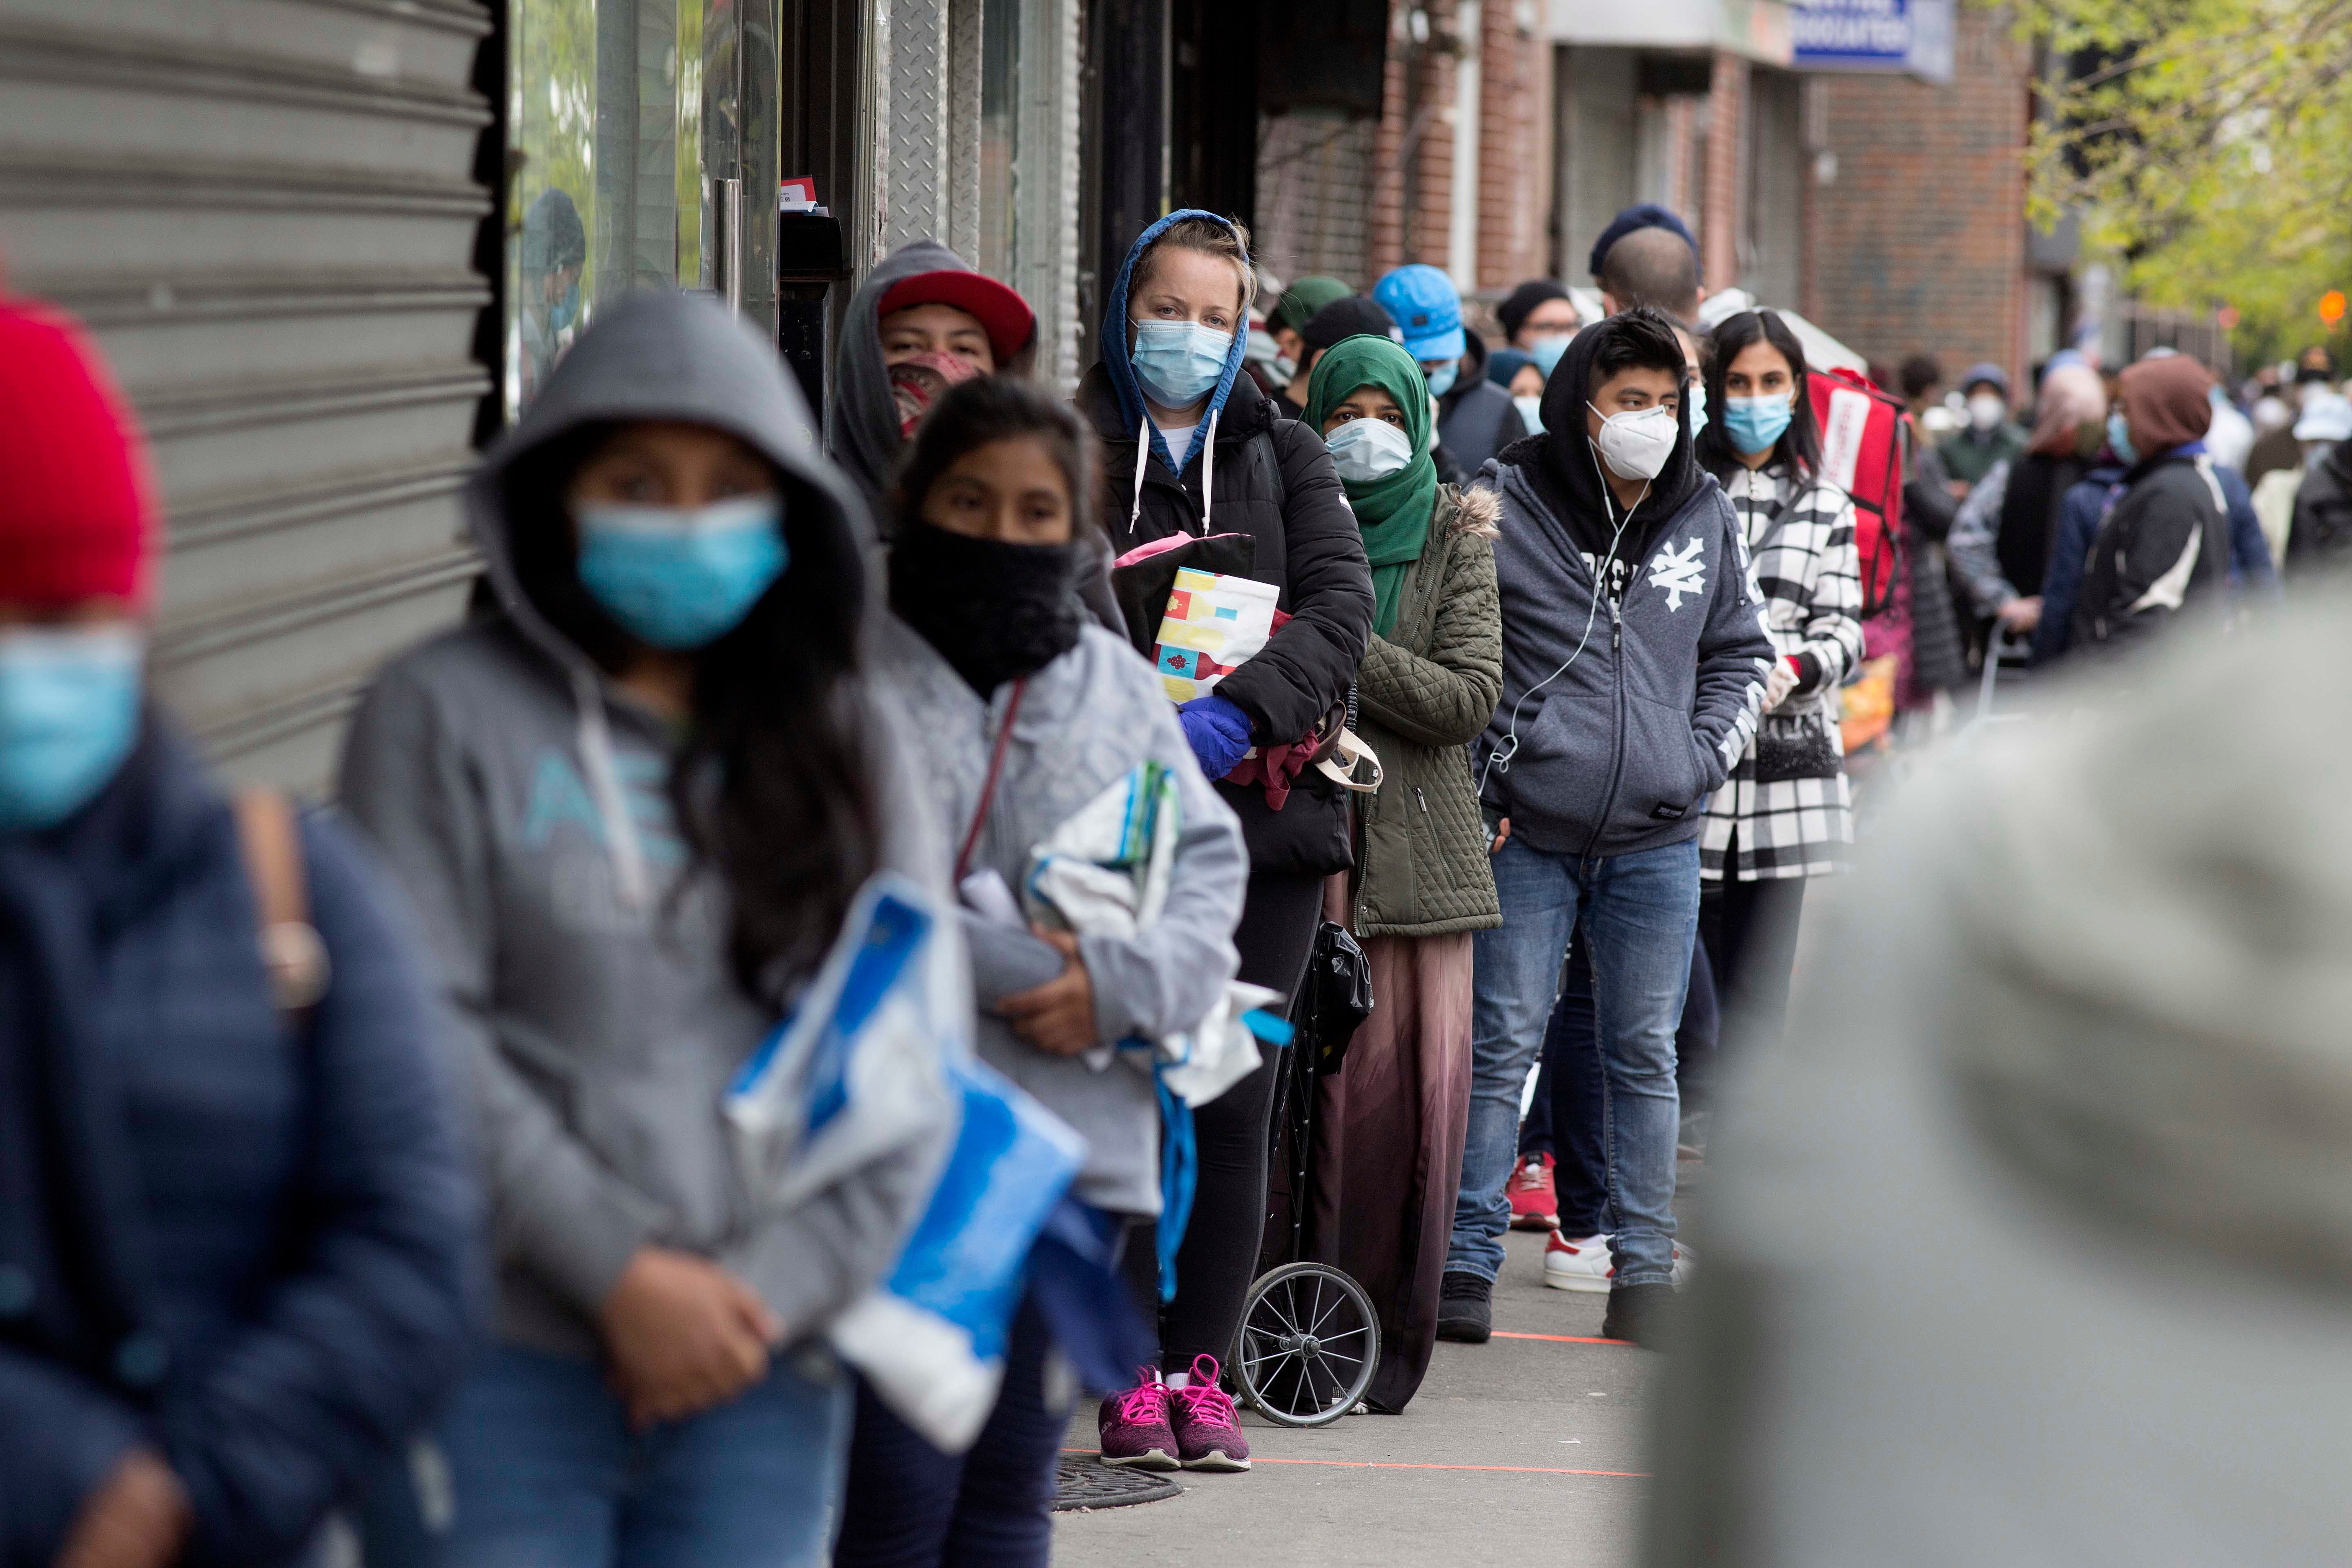 A line of people in face masks